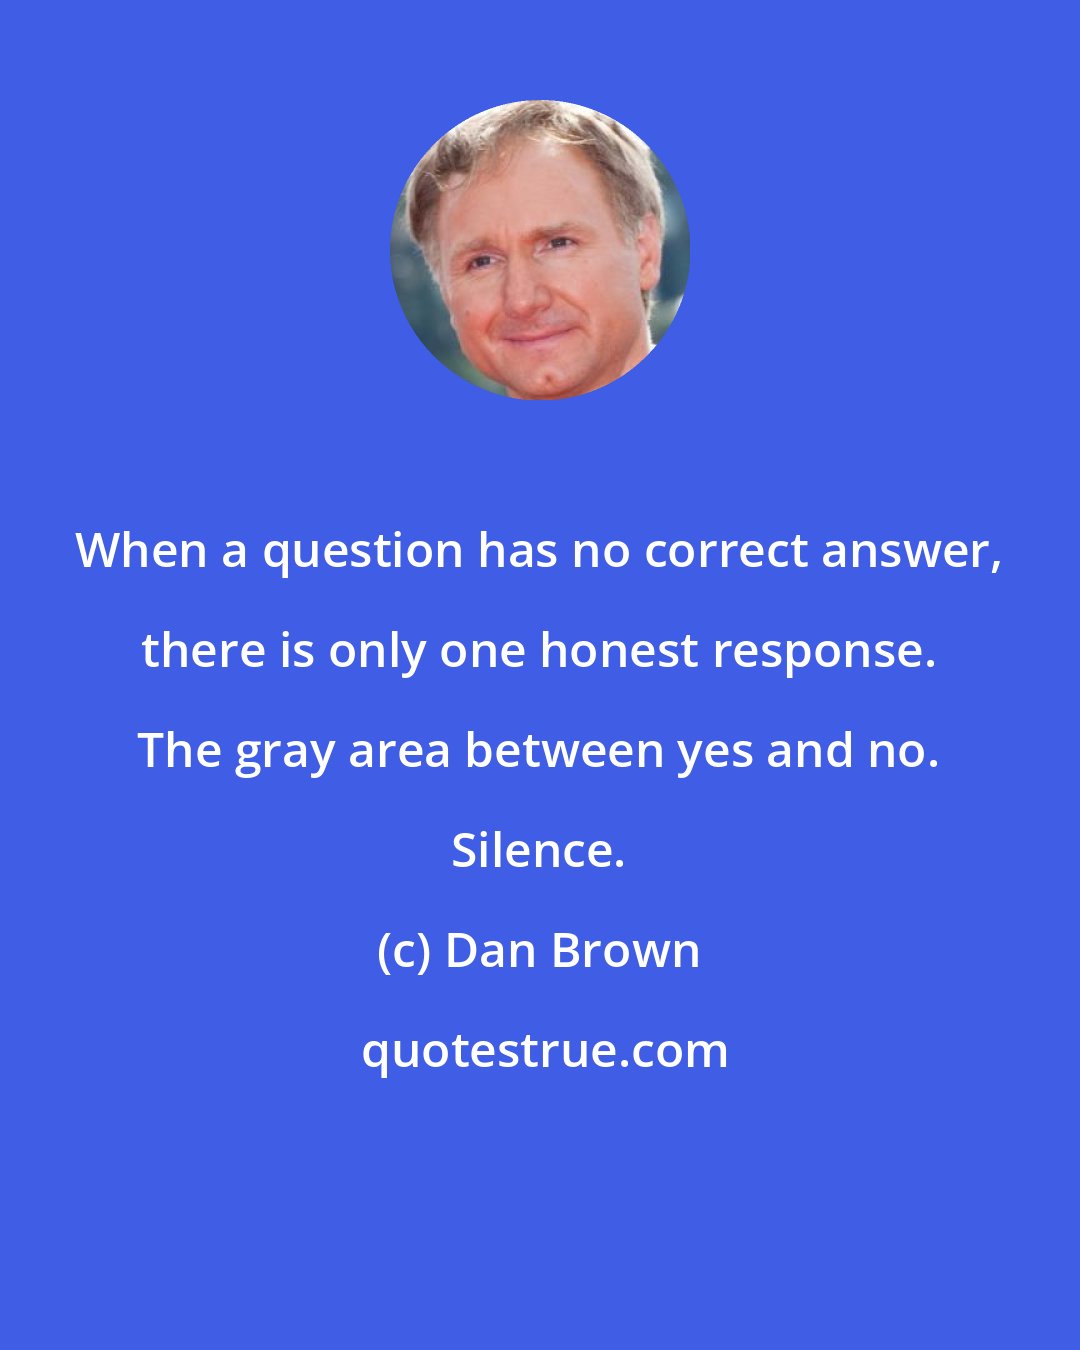 Dan Brown: When a question has no correct answer, there is only one honest response. The gray area between yes and no. Silence.